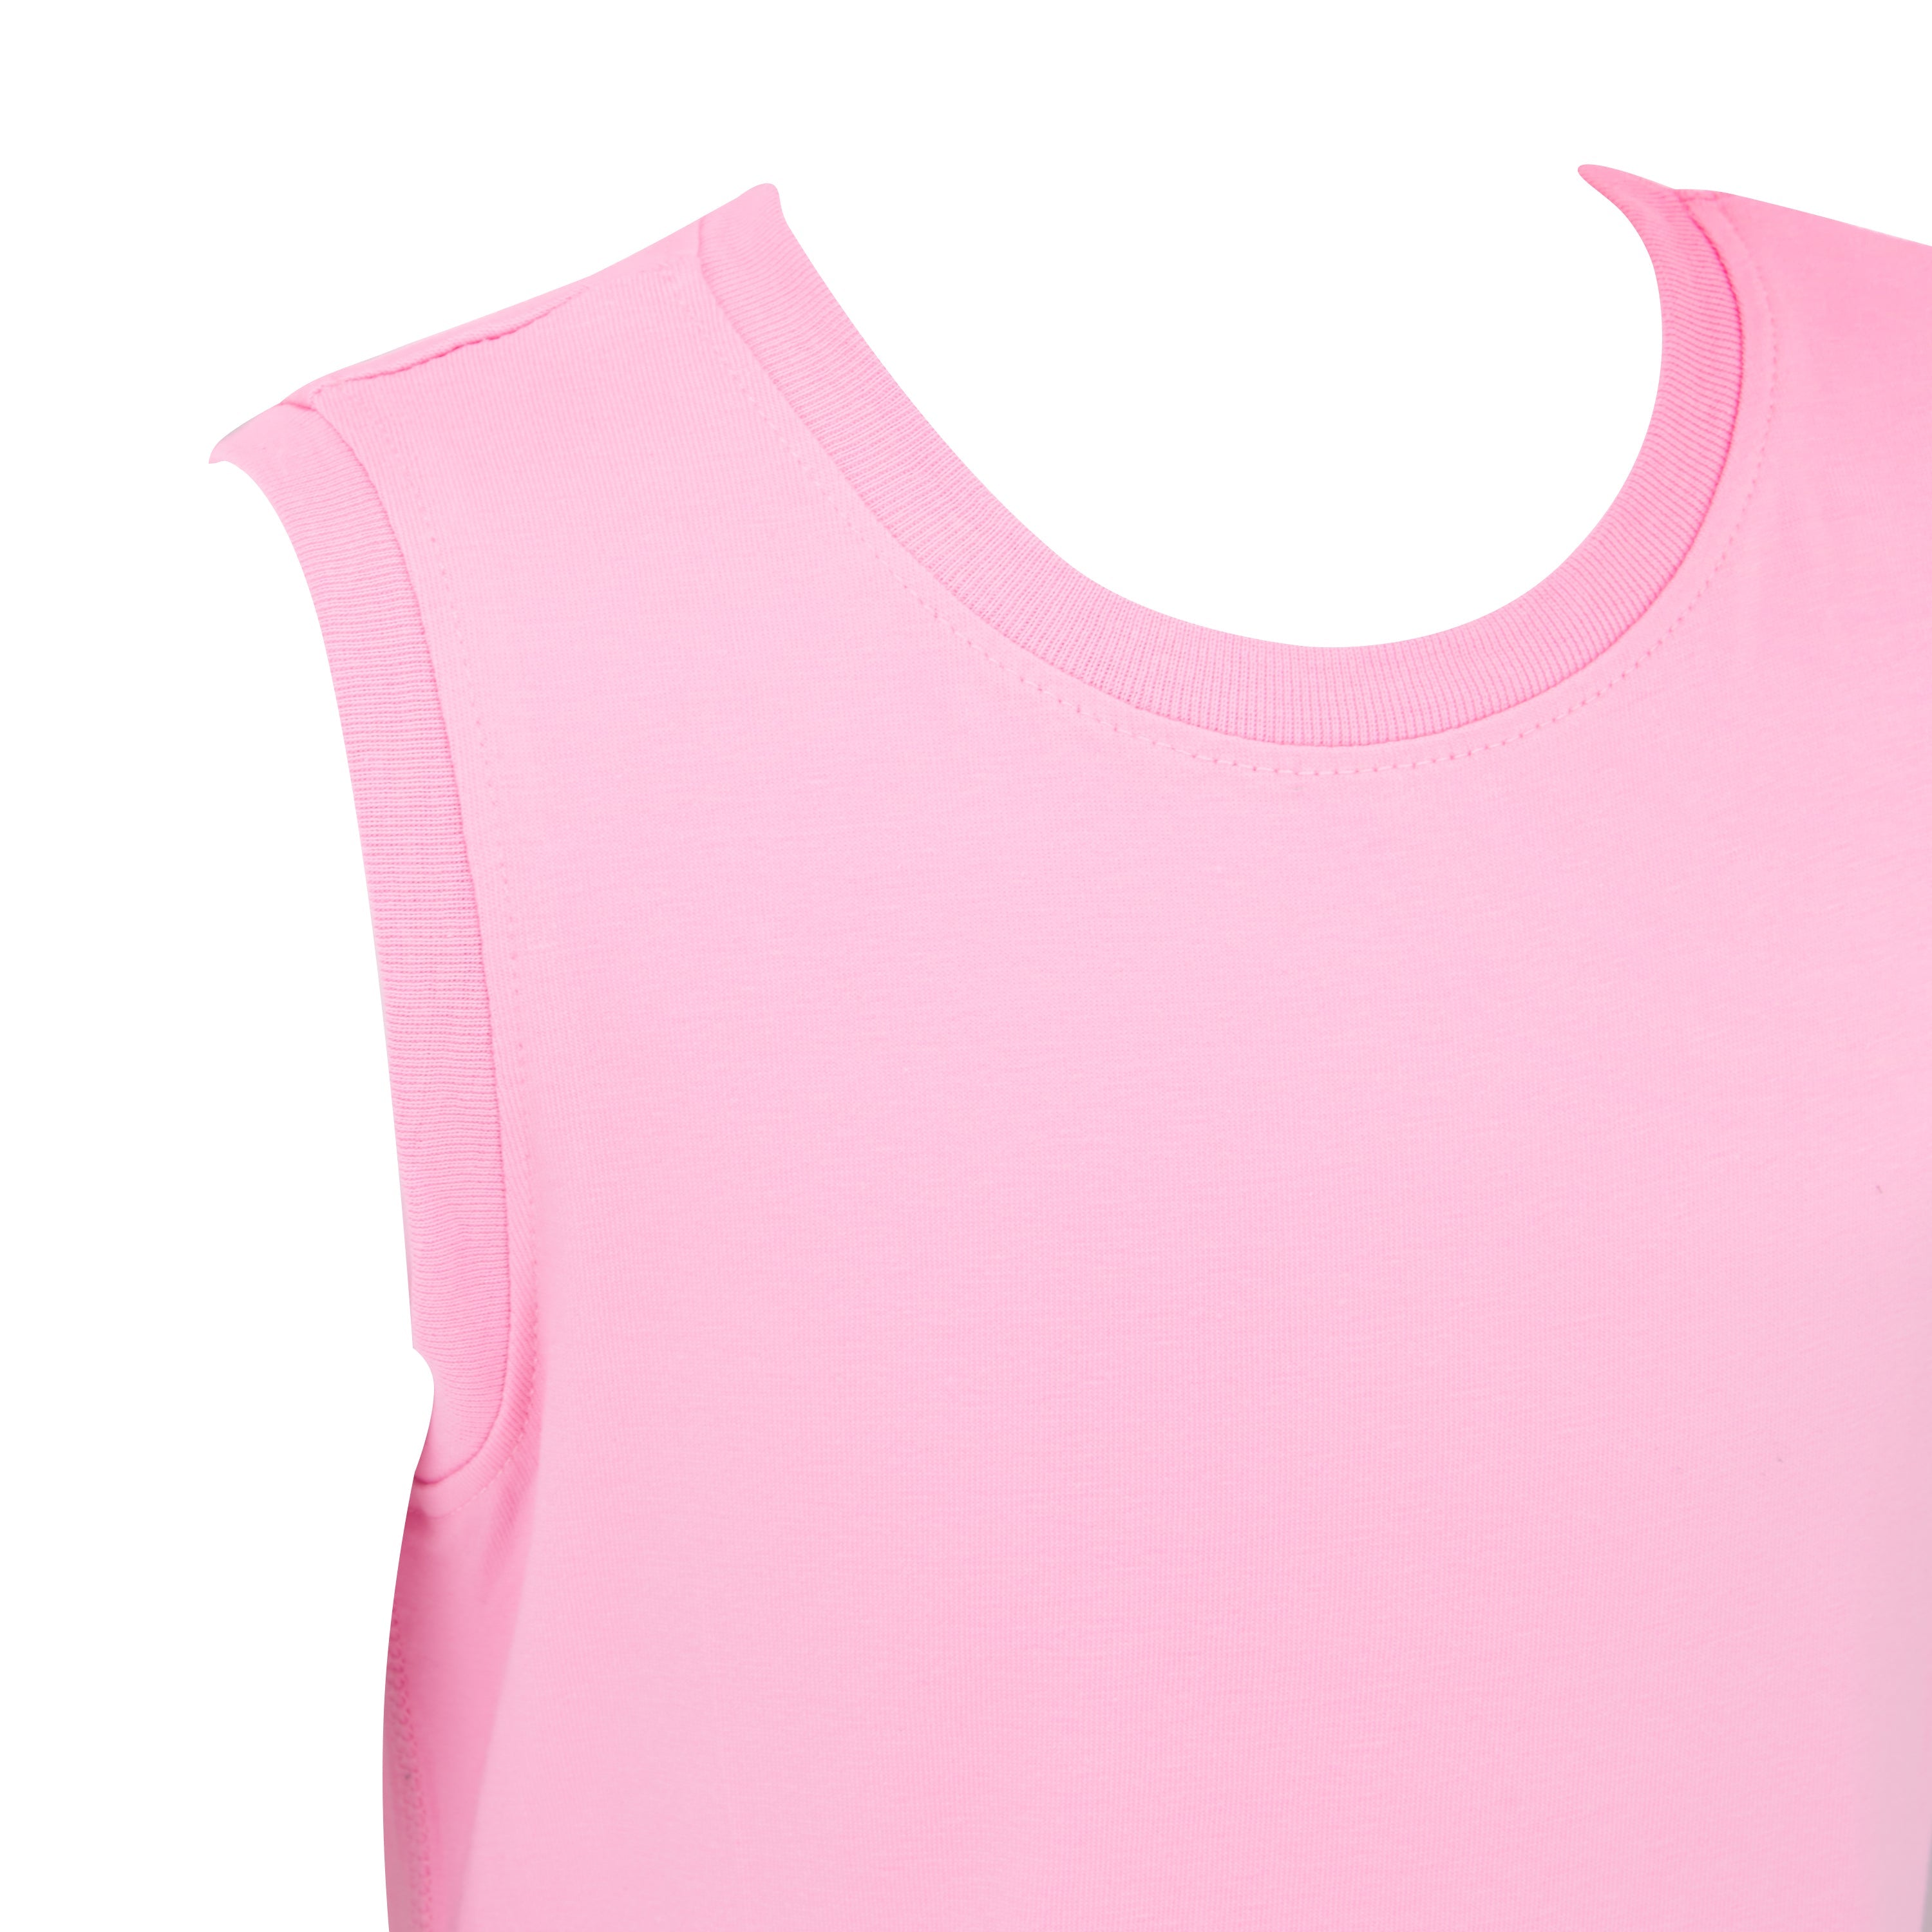 KayCey_Adaptive_clothing_for_older_children_with_special_needs_Sleeveless_with_Tube_Access_Pink_Shoulder